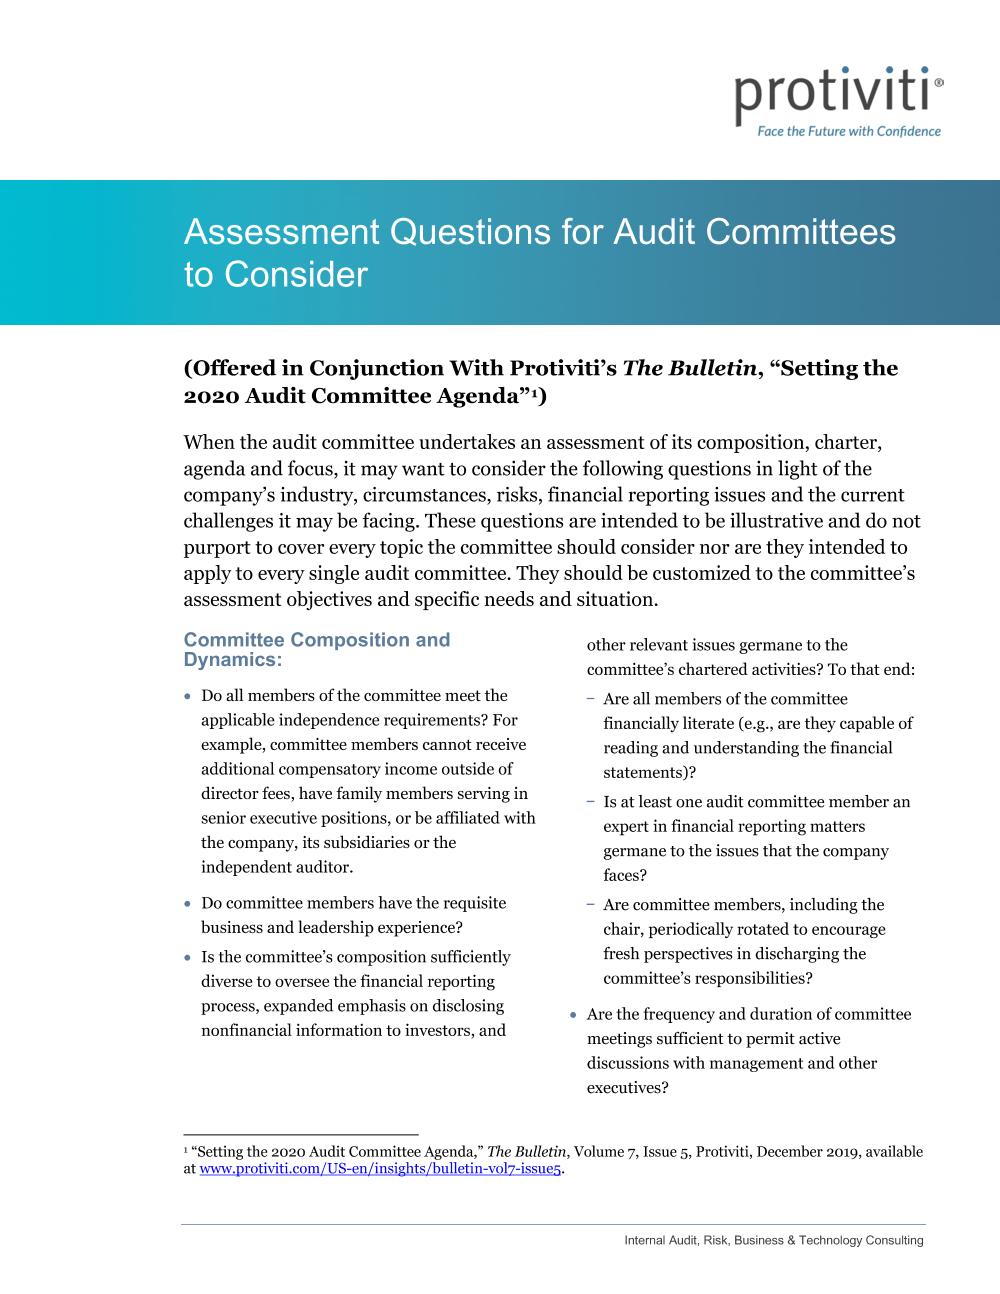 Screenshot of the first page of Assessment Questions for Audit Committees to Consider